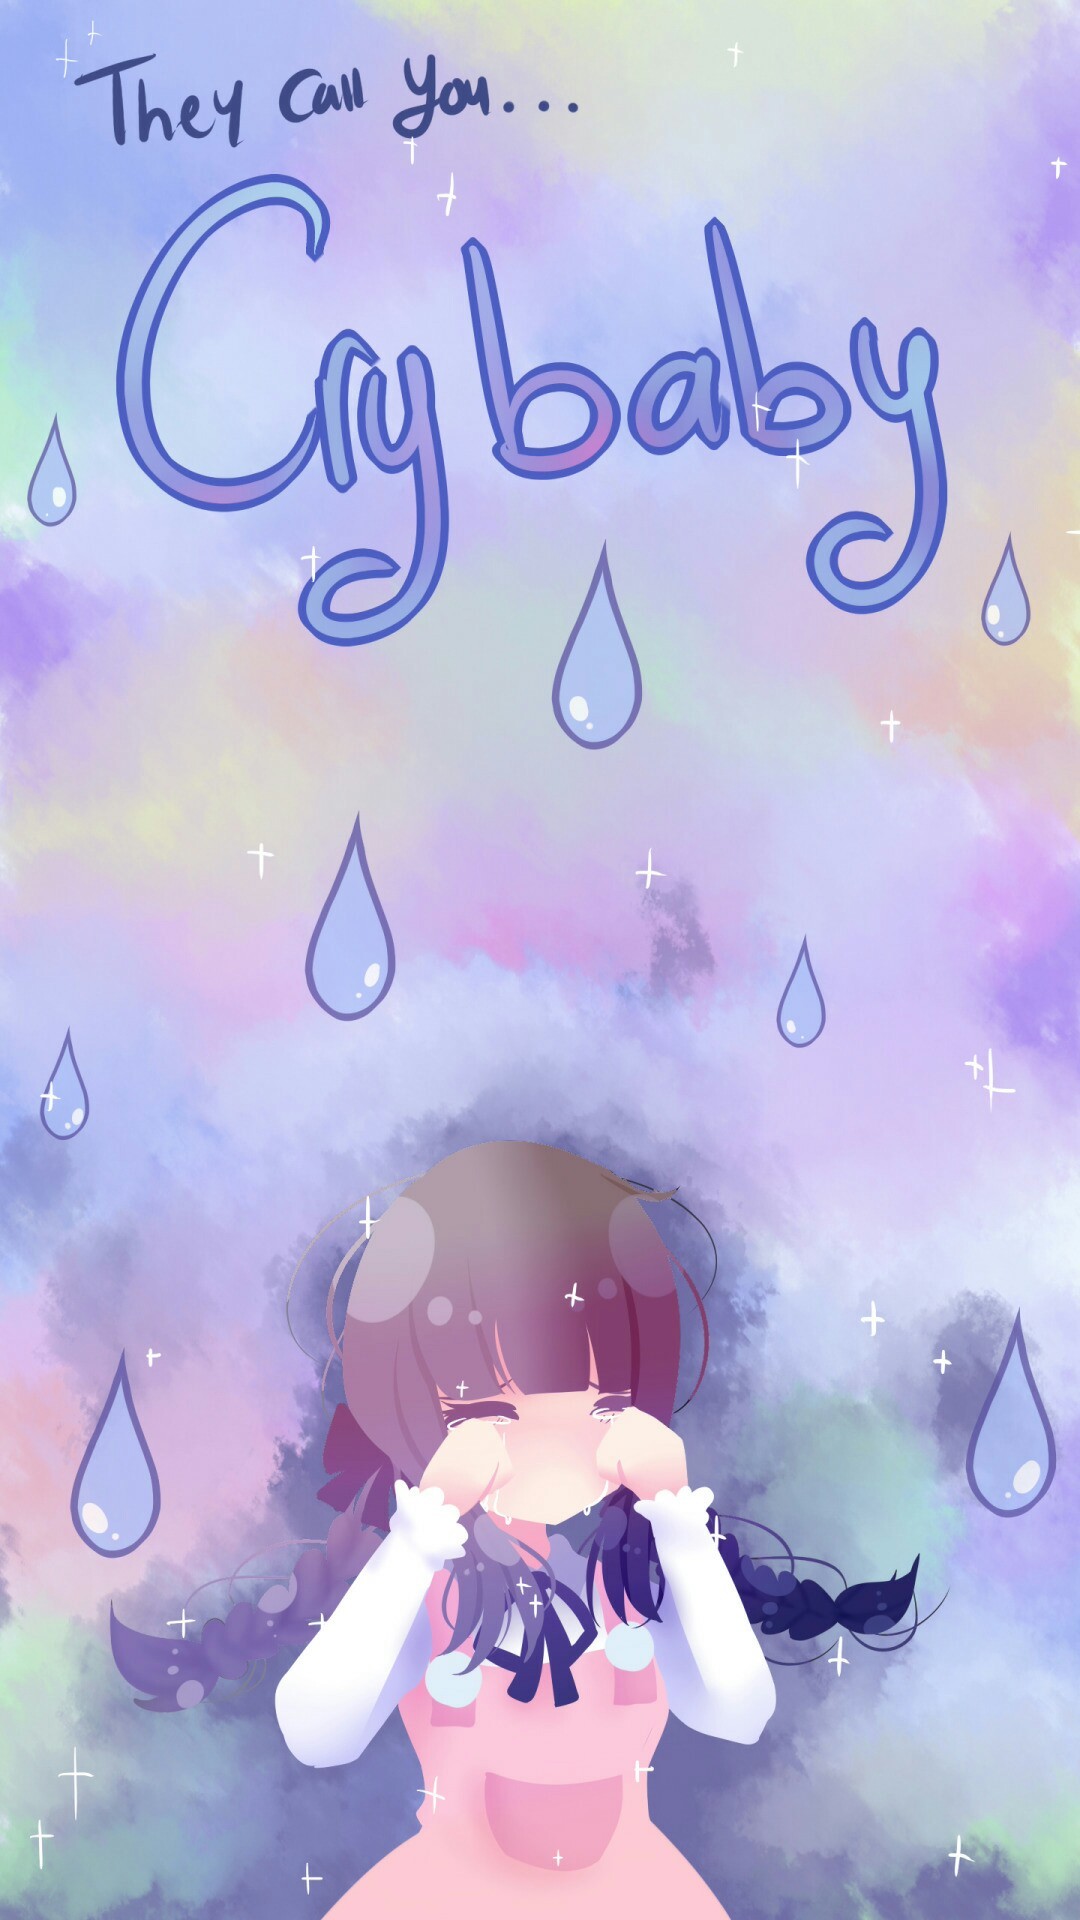 1080x1920 Cry Baby, Wallpapers, Wallpaper, Famous, Funds. melanie martinez ...